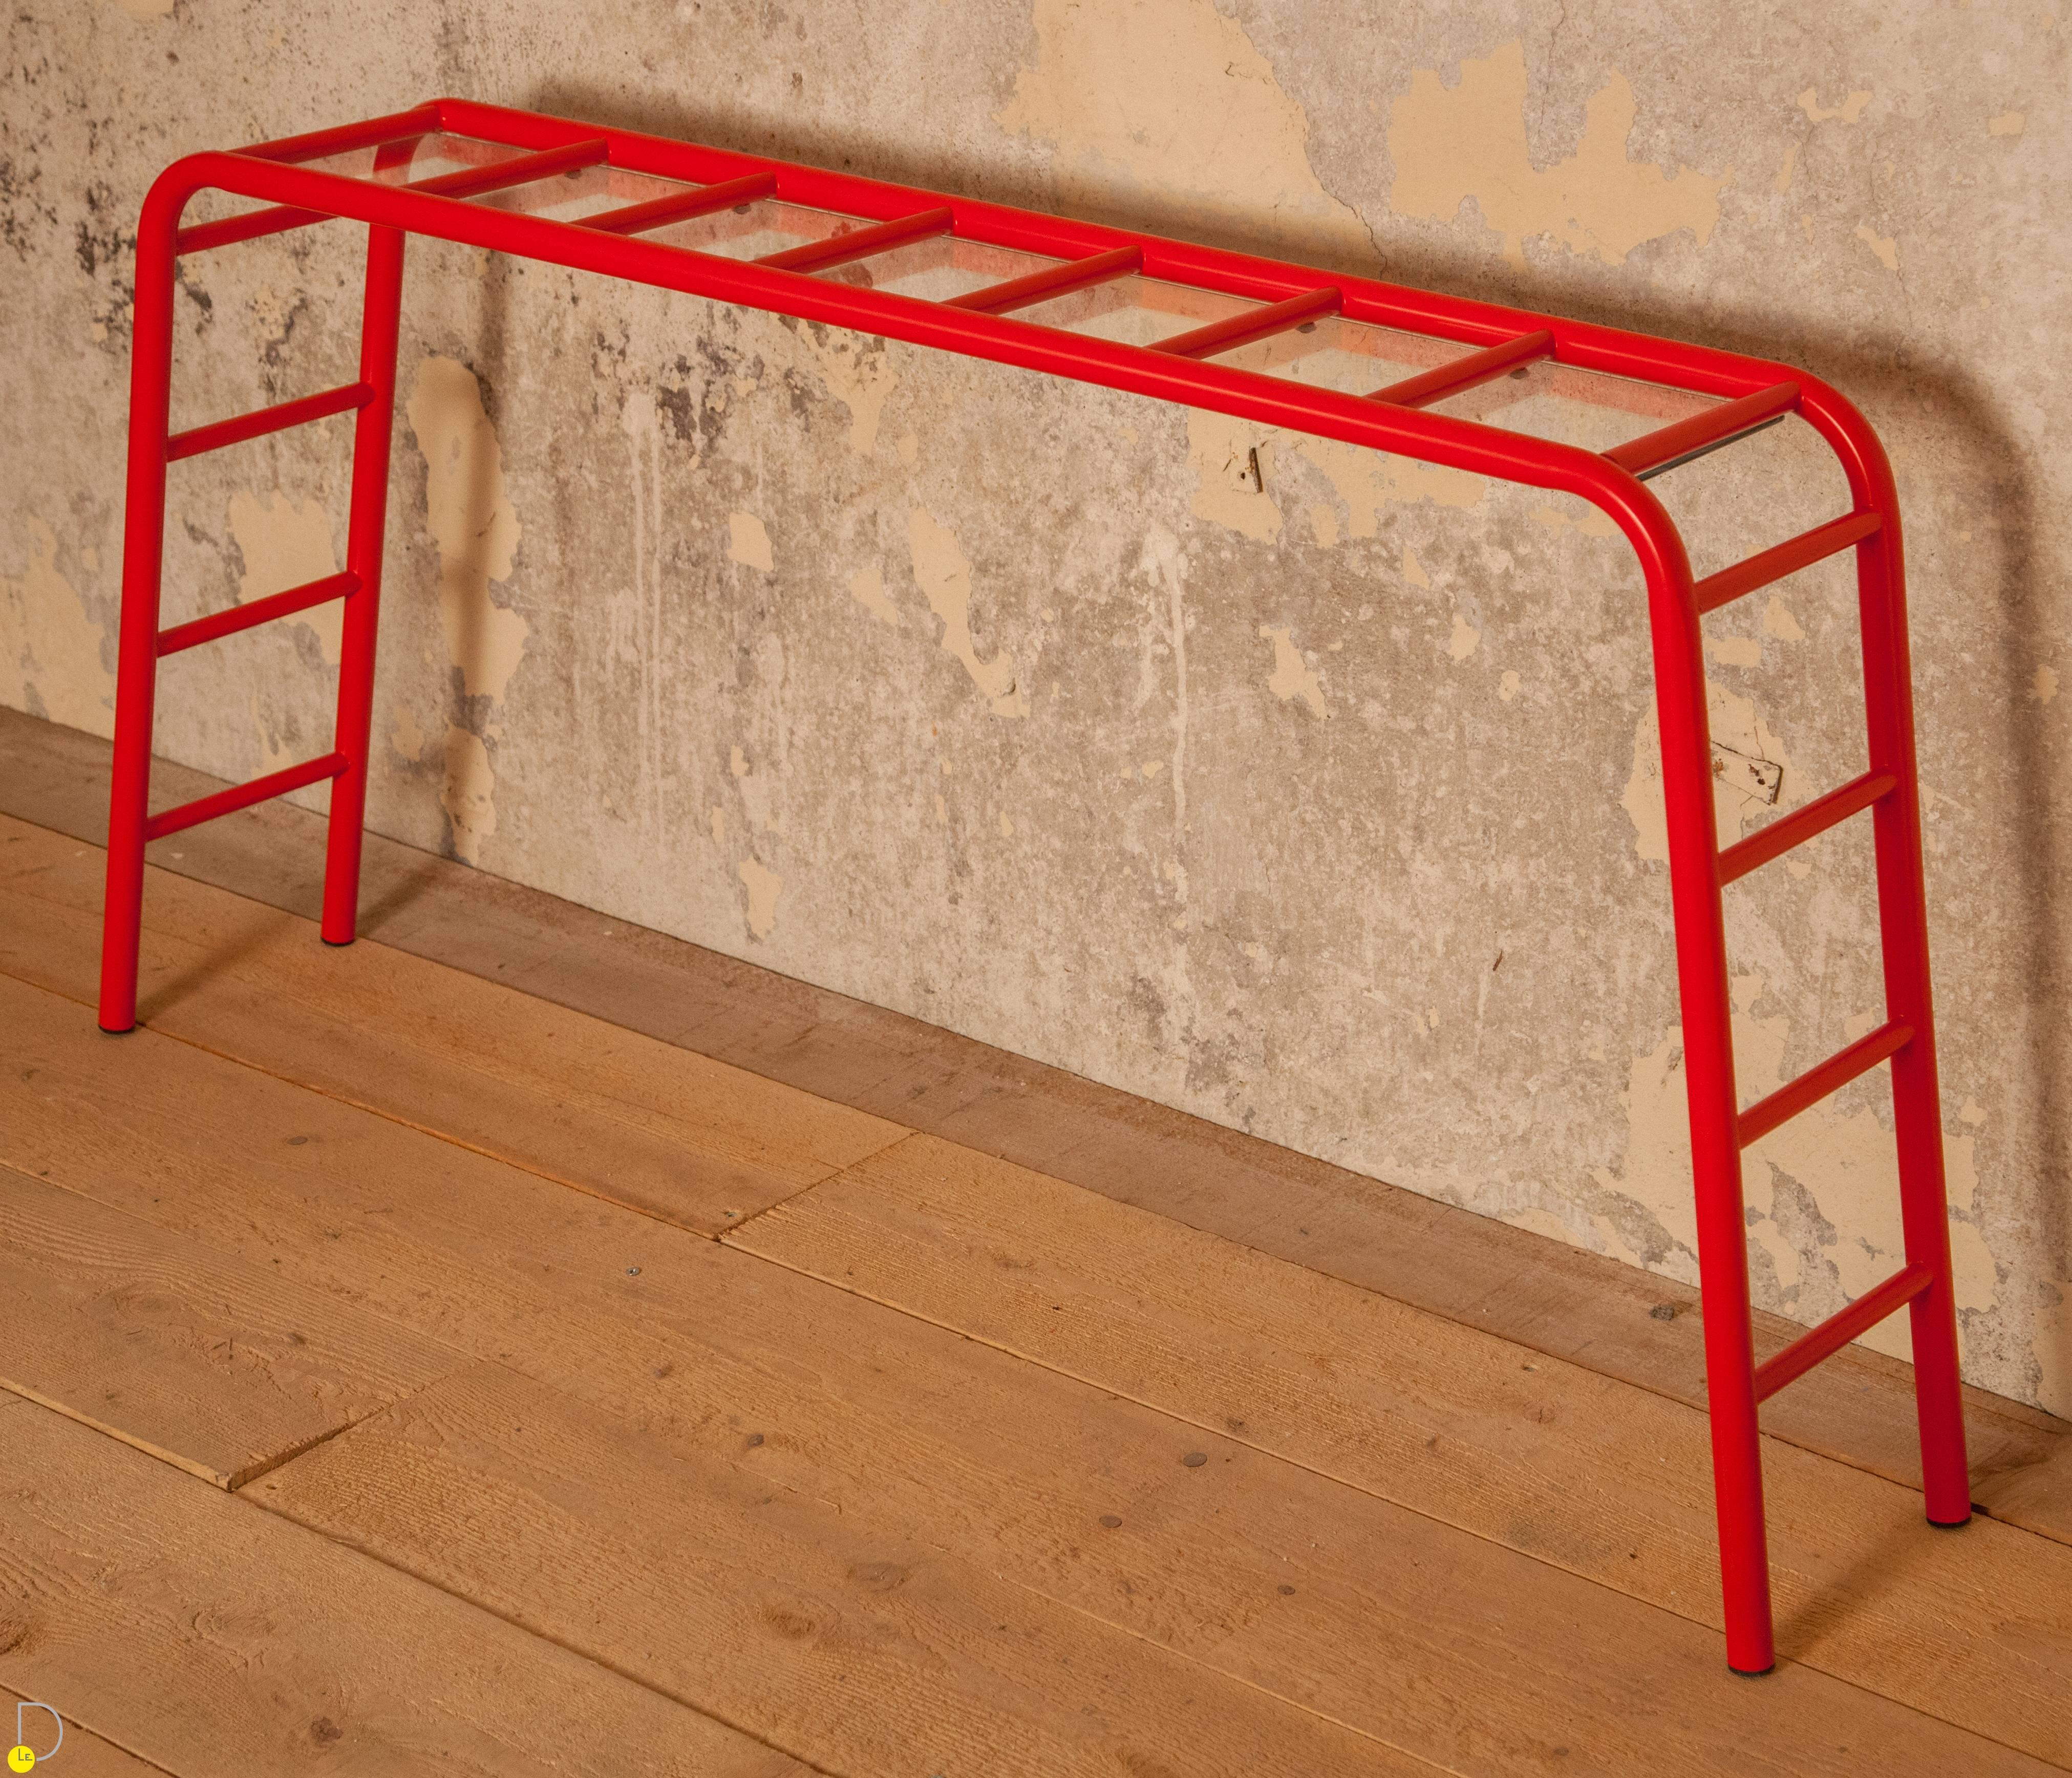 Escala the best shelves for a friendly interior - remembering the ladders of kindergartens! Be careful about its curved lines, Escala is authentic and characterful for an original touch and an offbeat vibe! 
Cedric Dequidt, creator of innovative